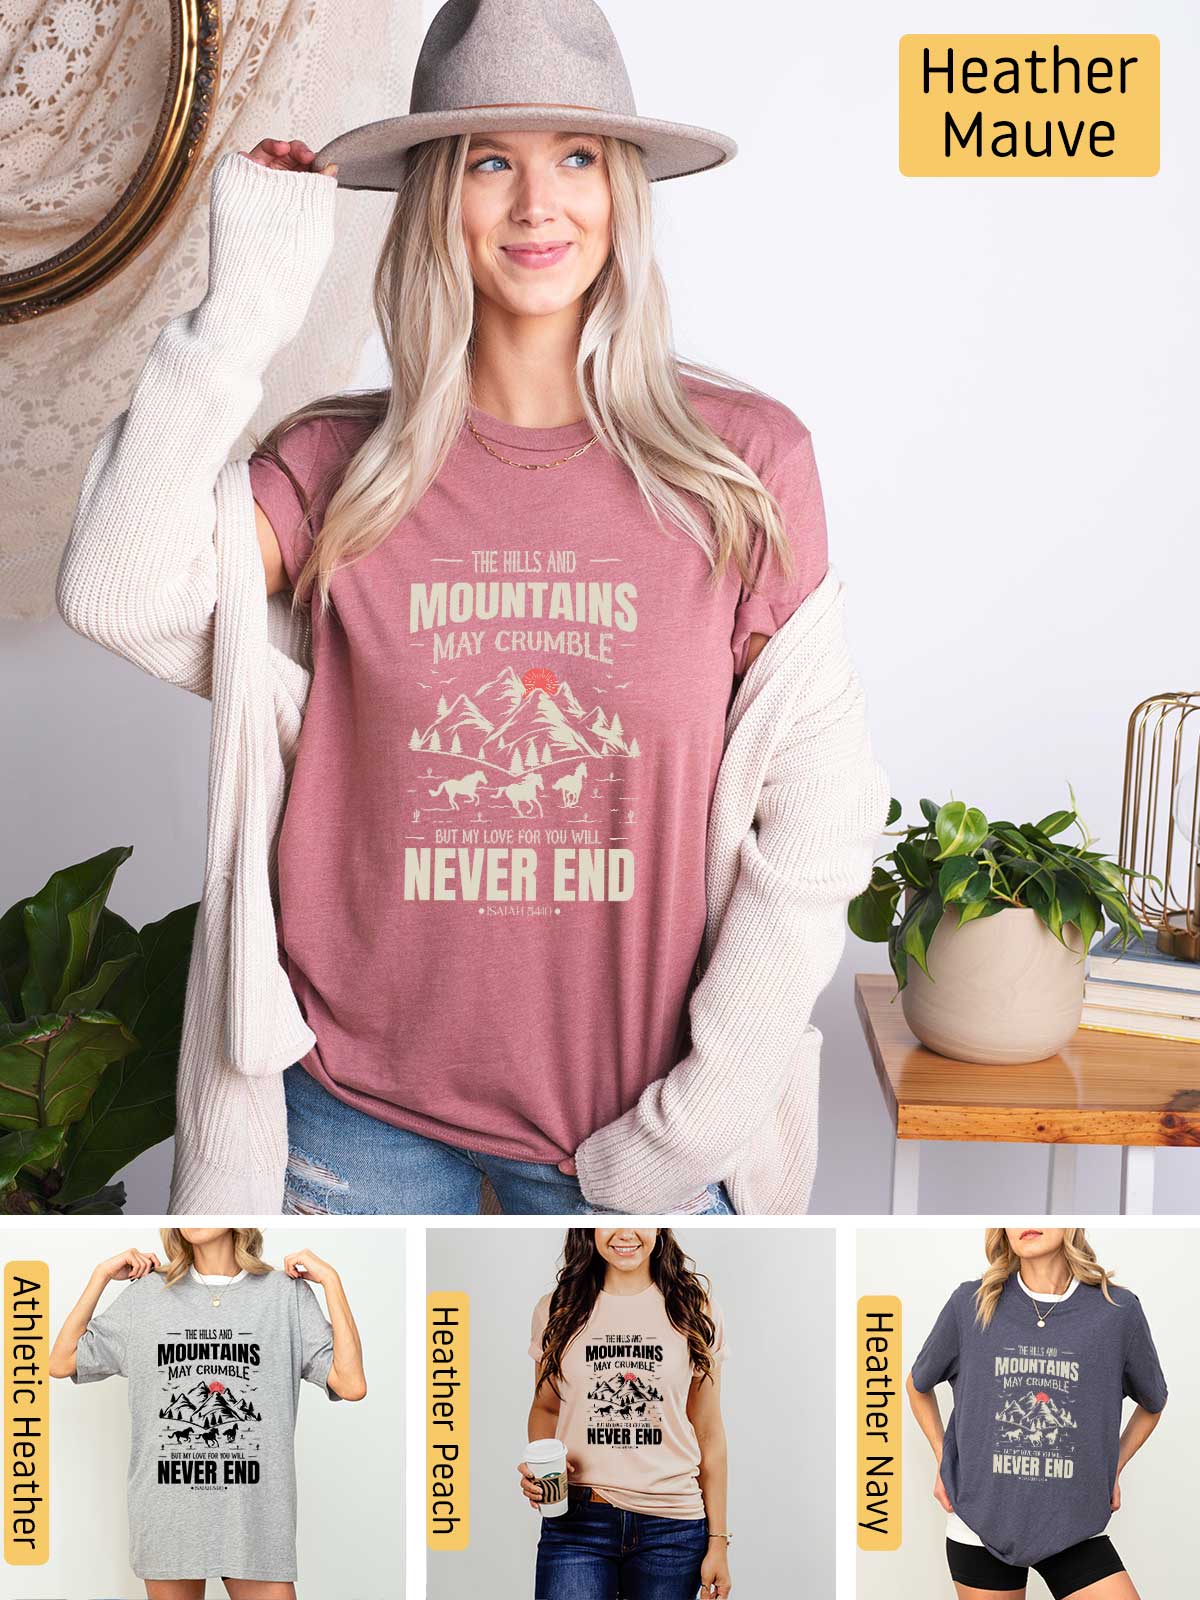 a woman wearing a hat and a t - shirt that says mountains never end